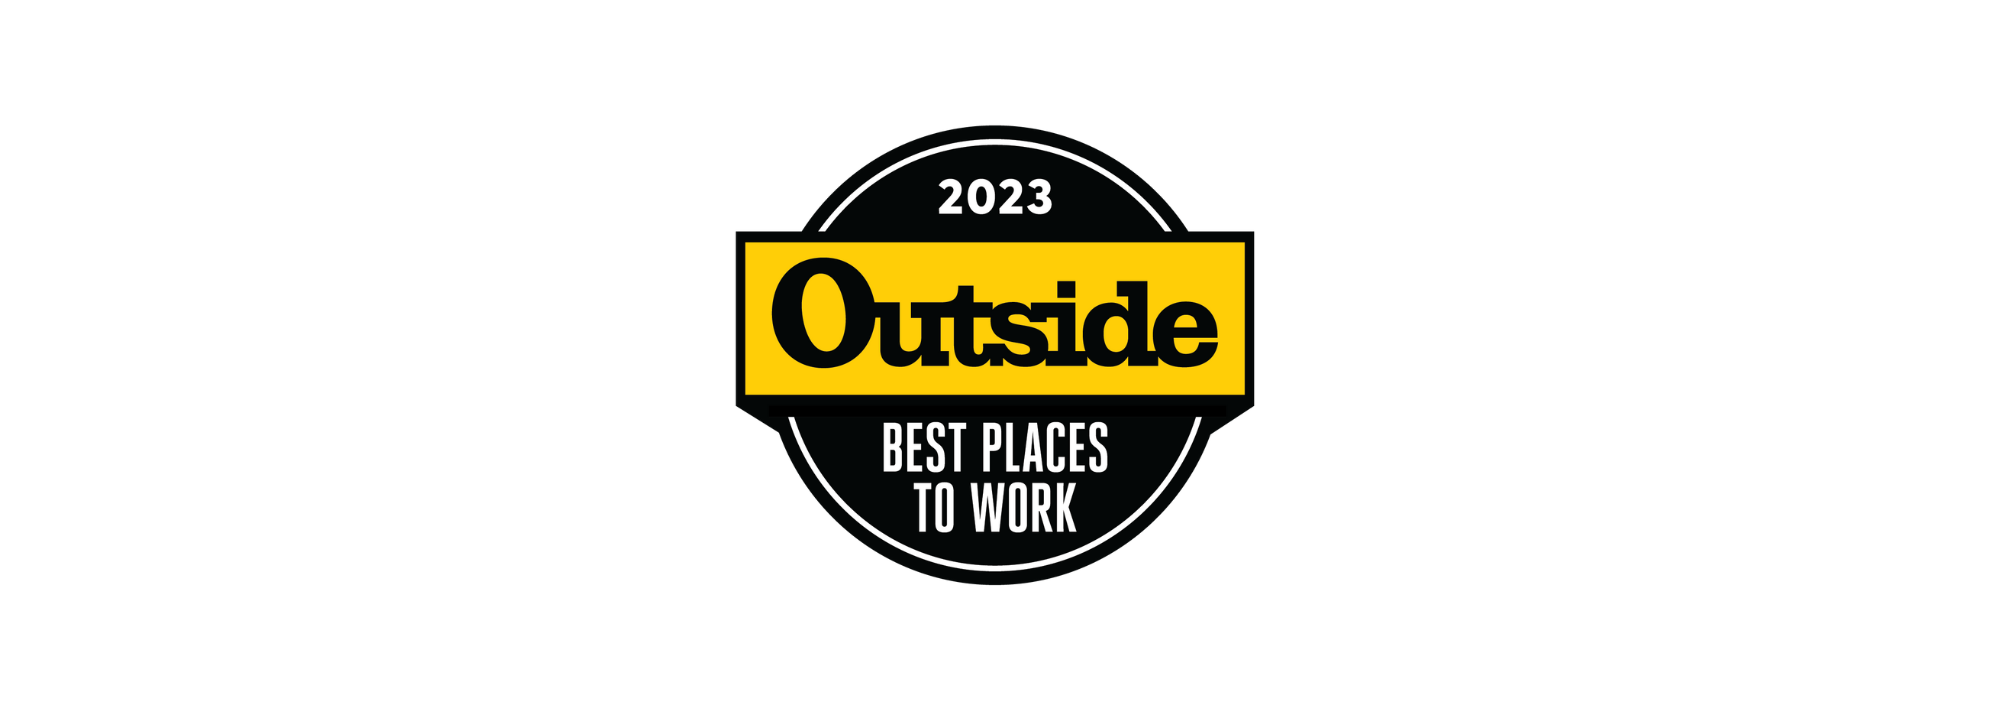 Aspenware Named One of Outside’s 50 Best Places to Work Again in 2023 ...